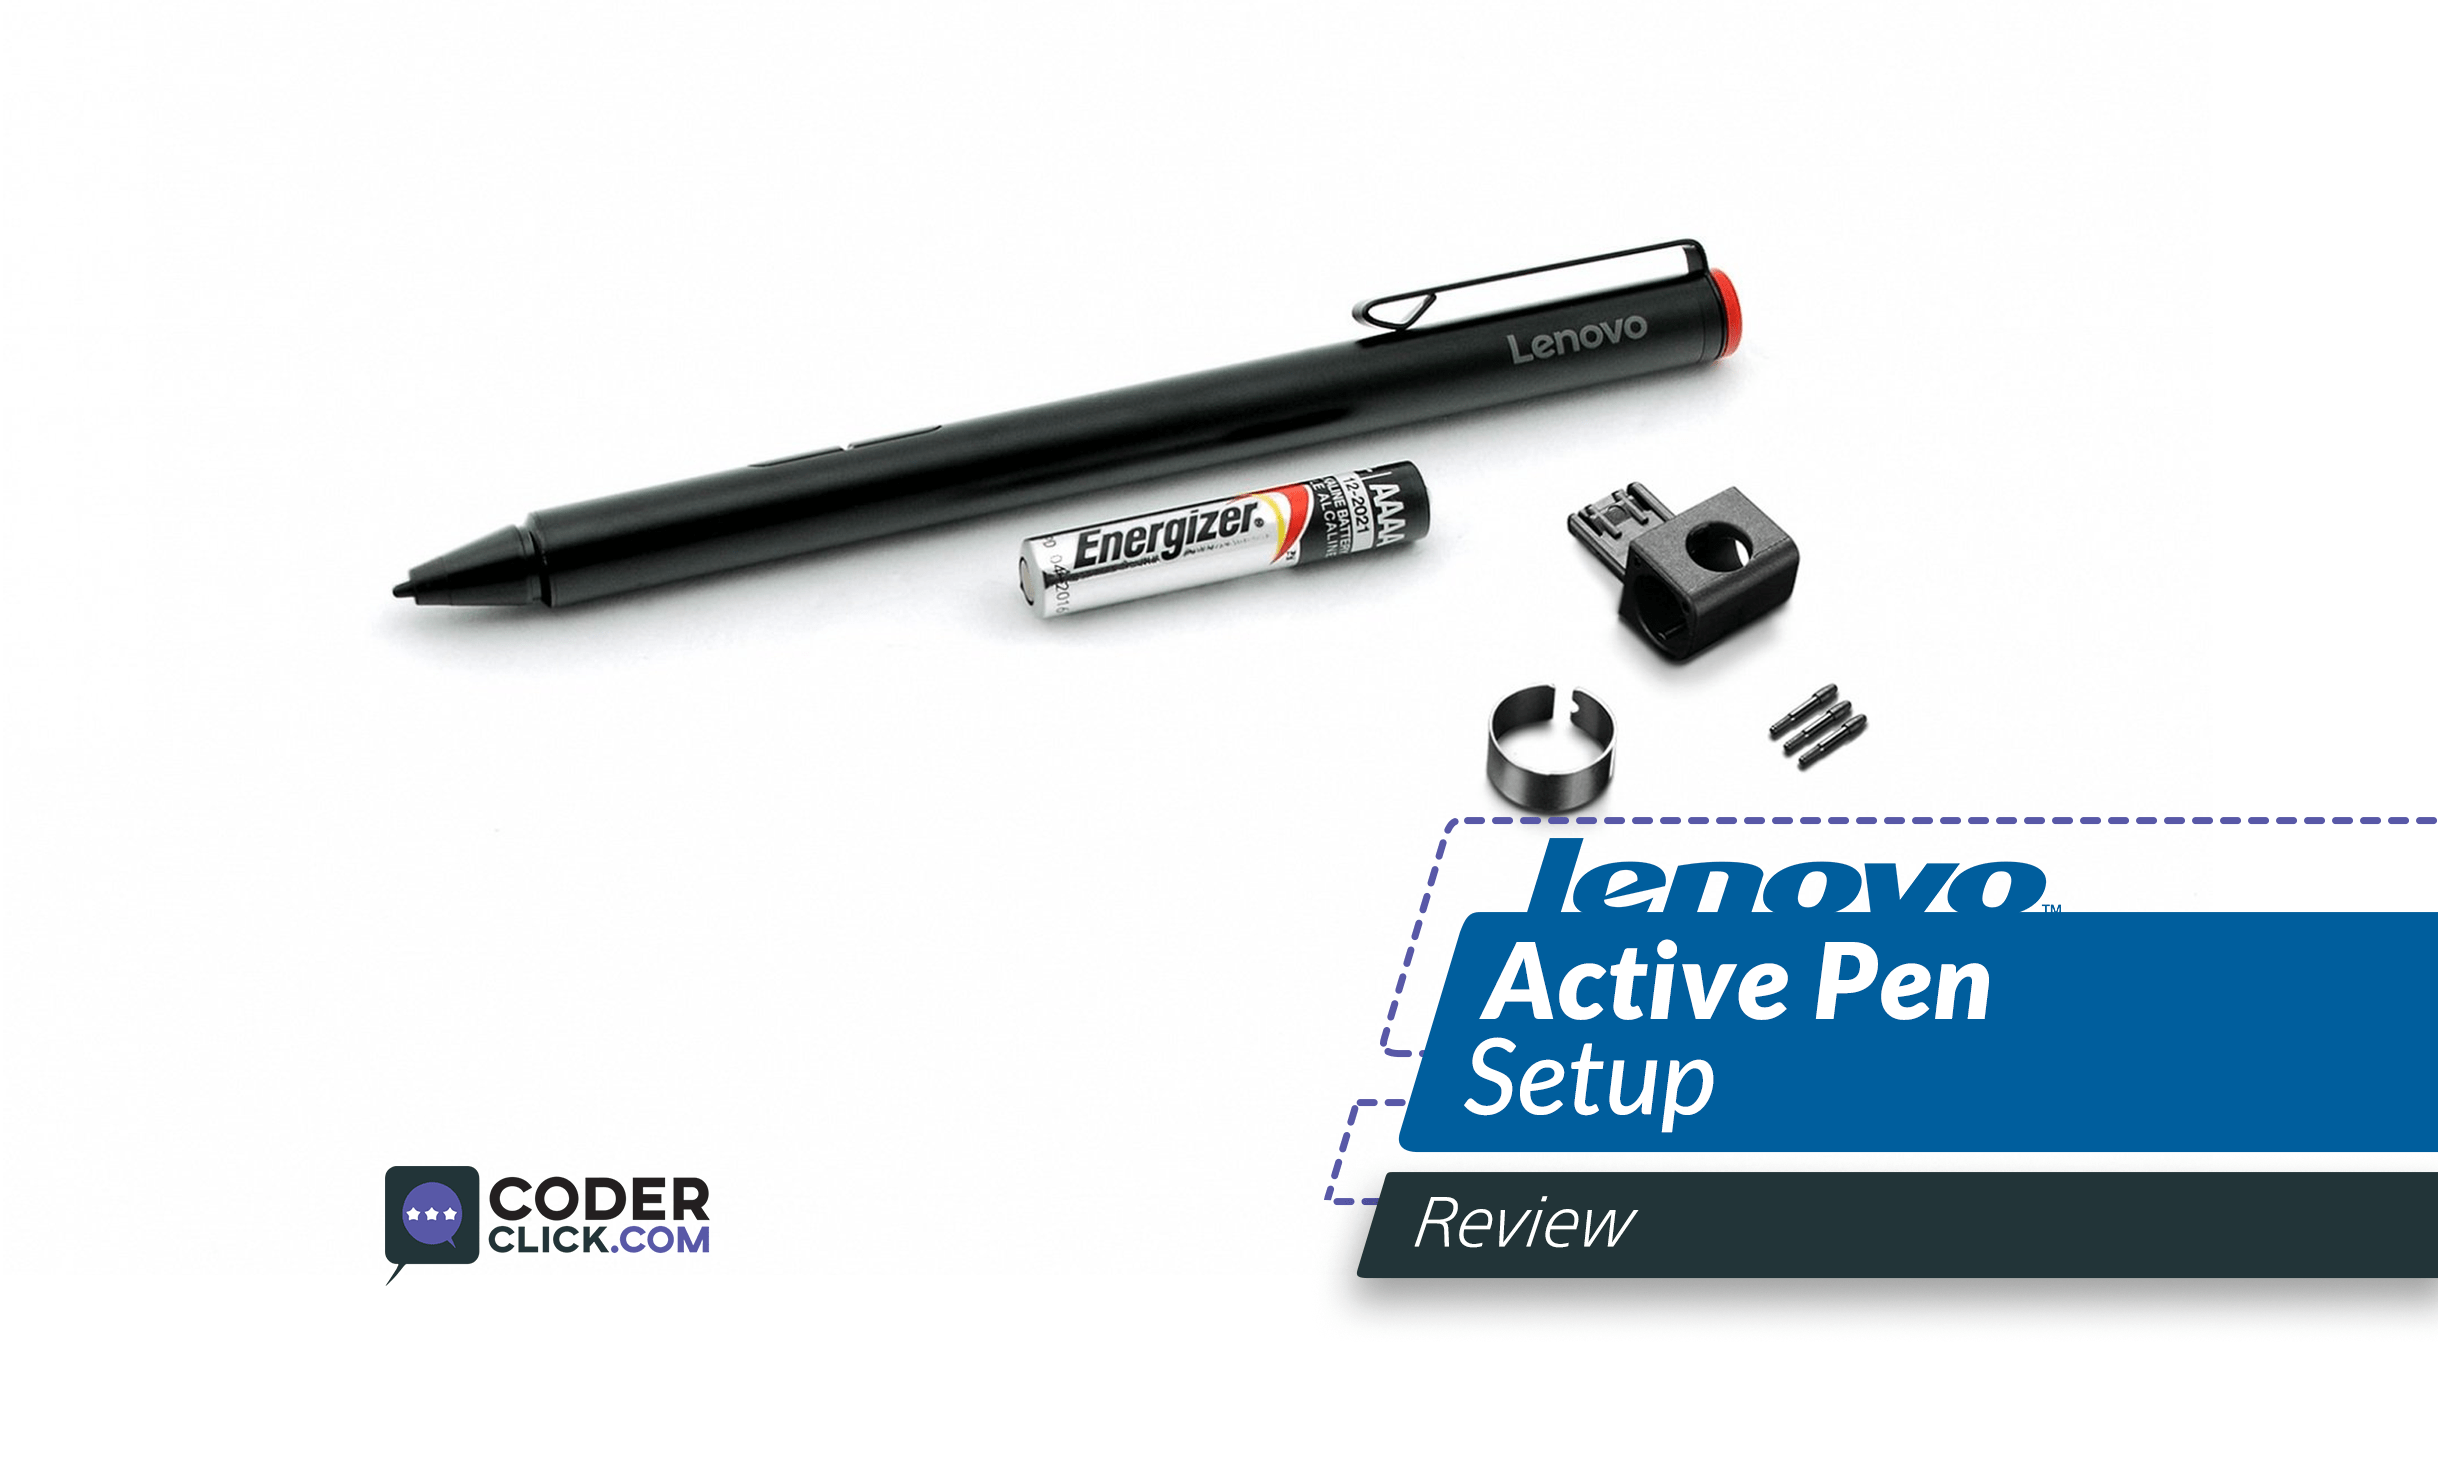 Lenovo Active Pen Setup For 1 and 2: With Guidance And Easy Instructions